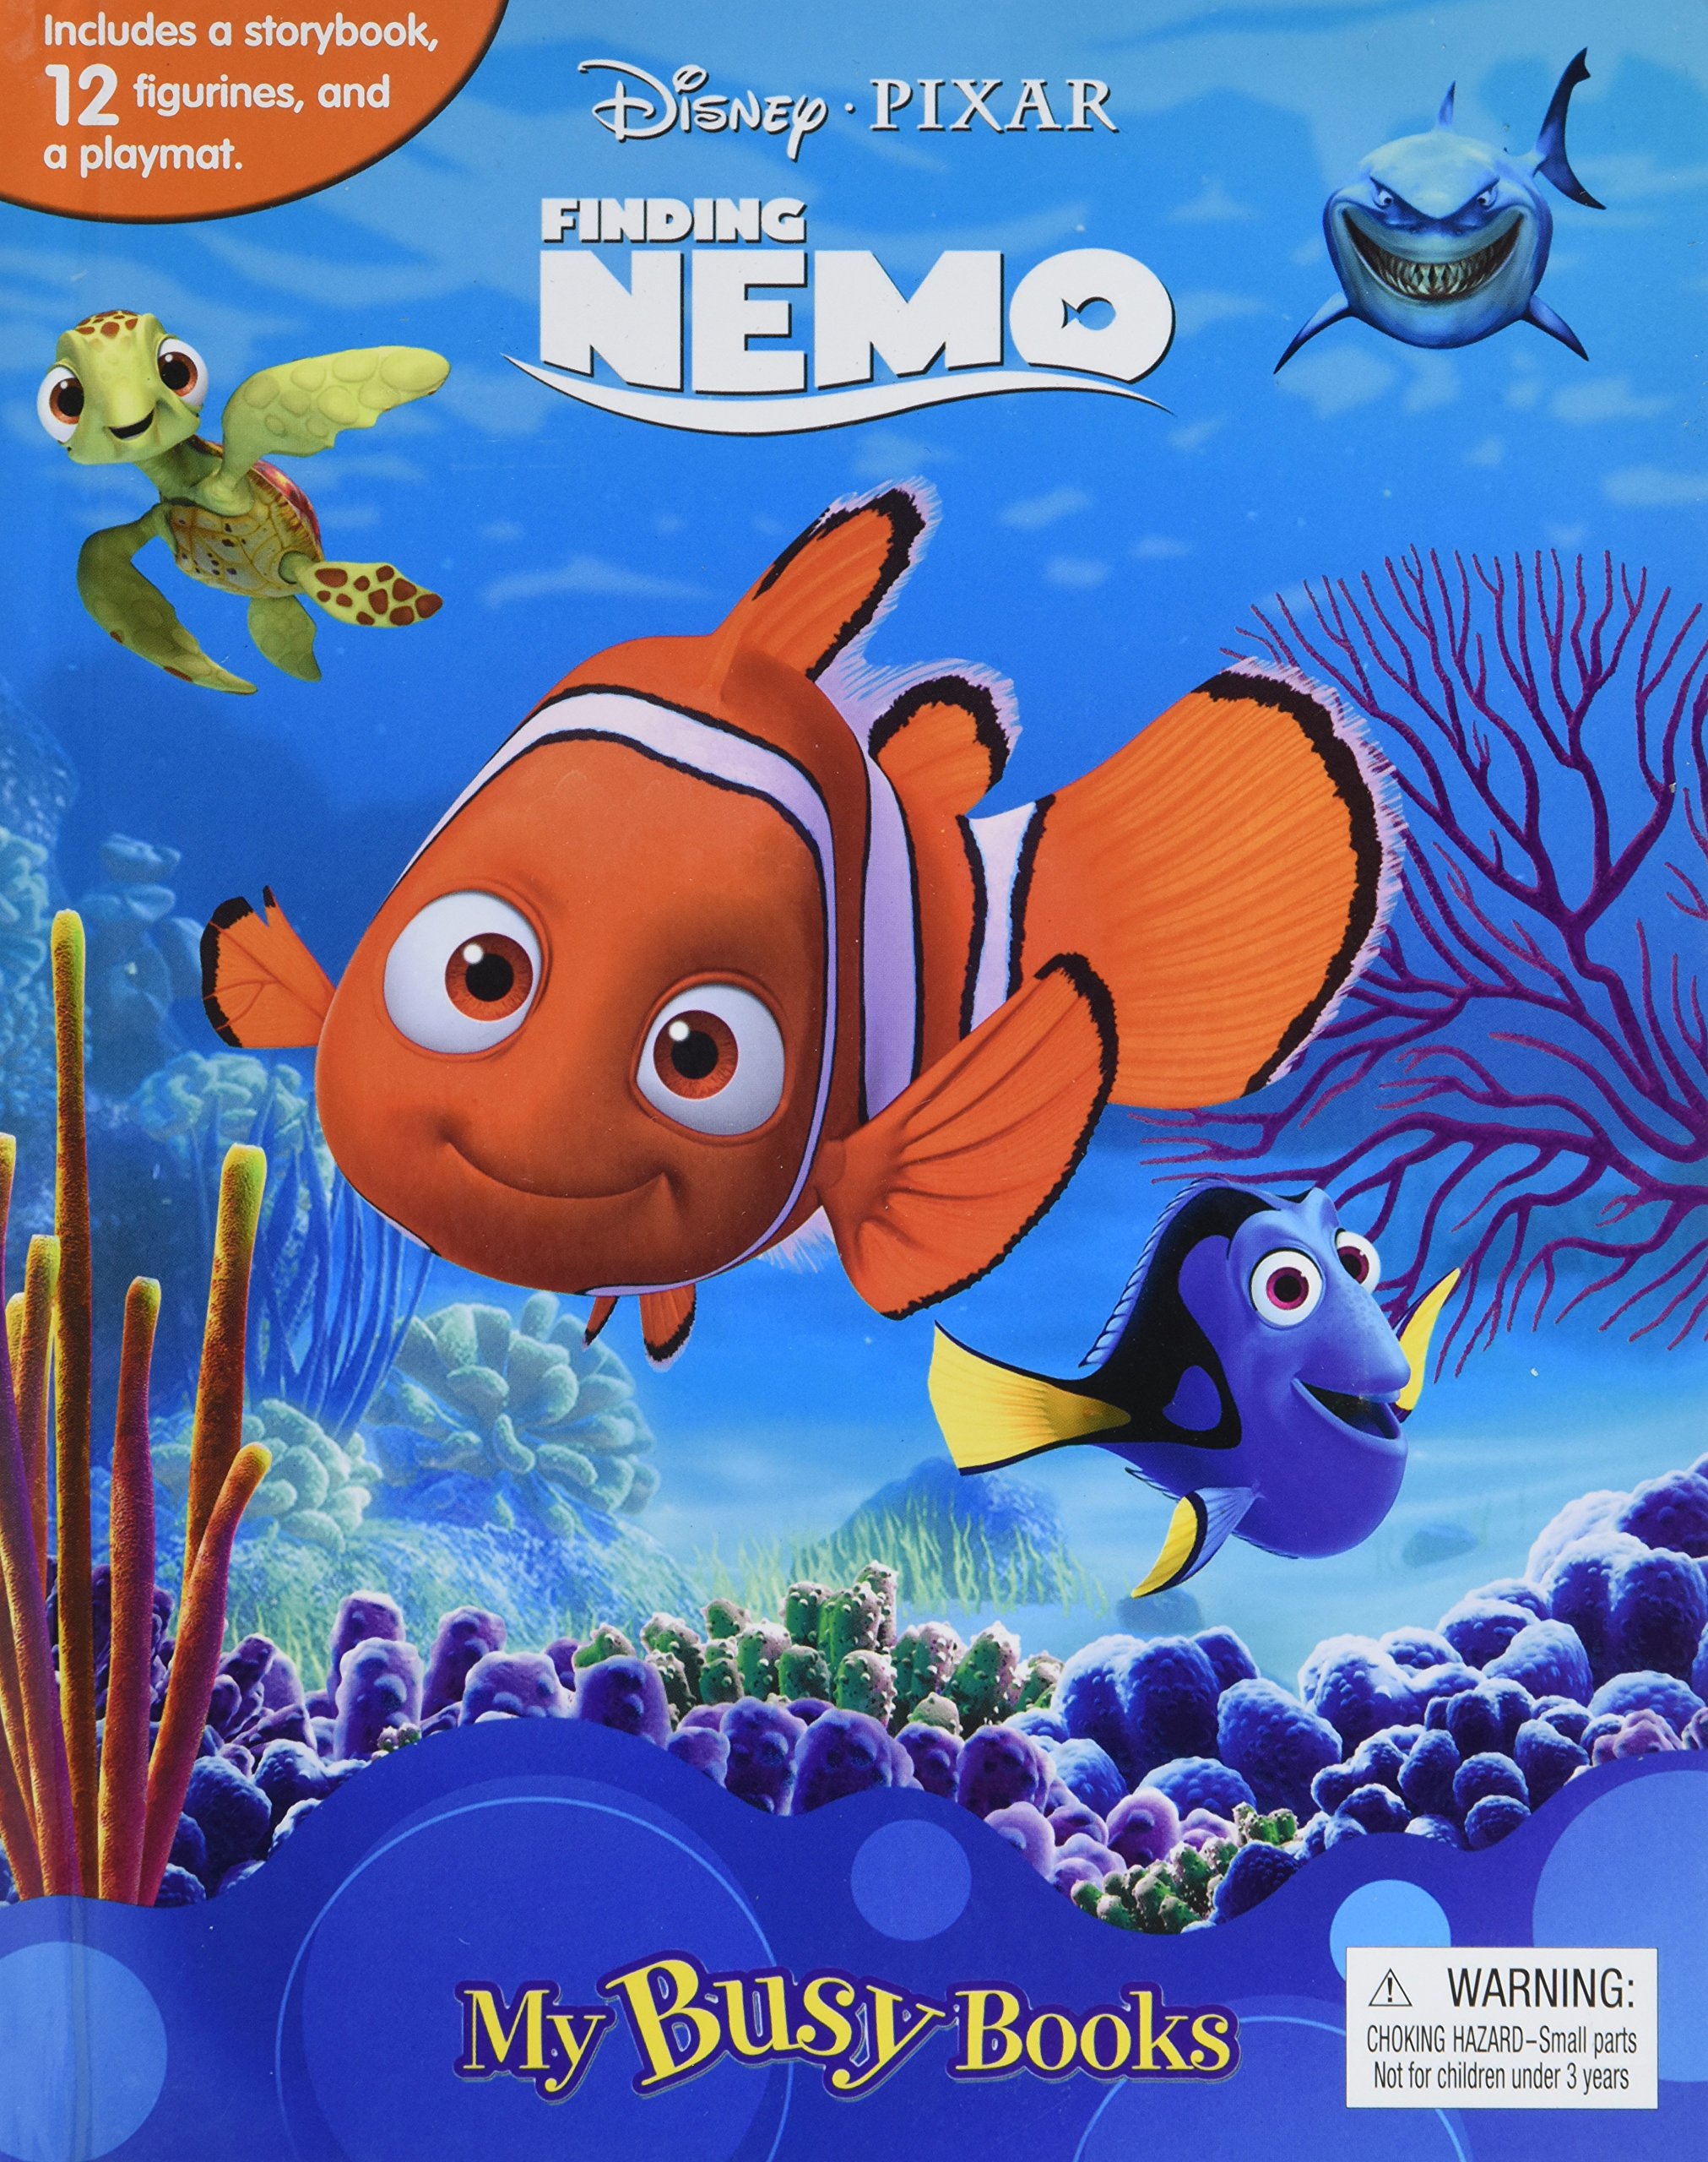 finding nemo tamil dubbed movie download